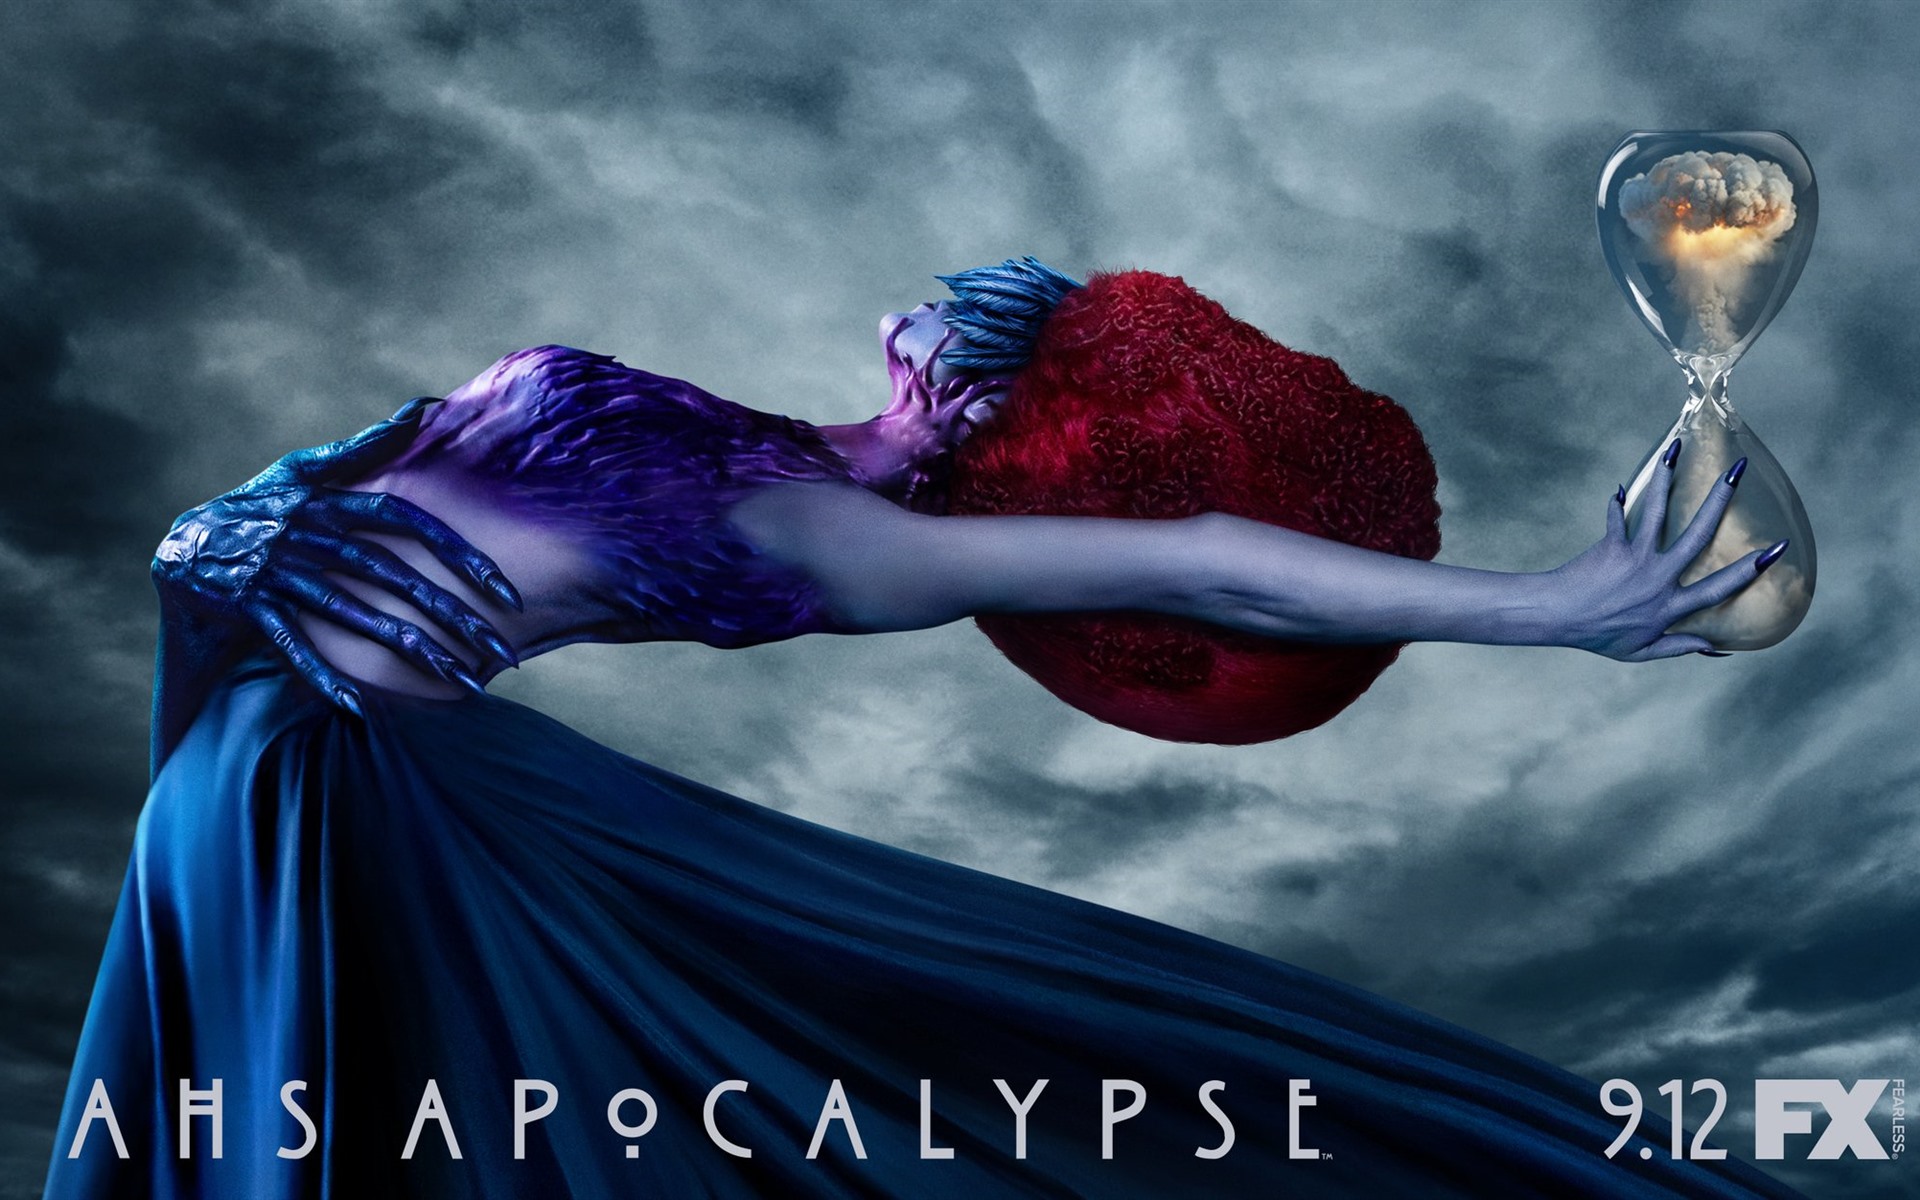 Download This Wallpaper - American Horror Story 8º Temporada Apocalypse , HD Wallpaper & Backgrounds